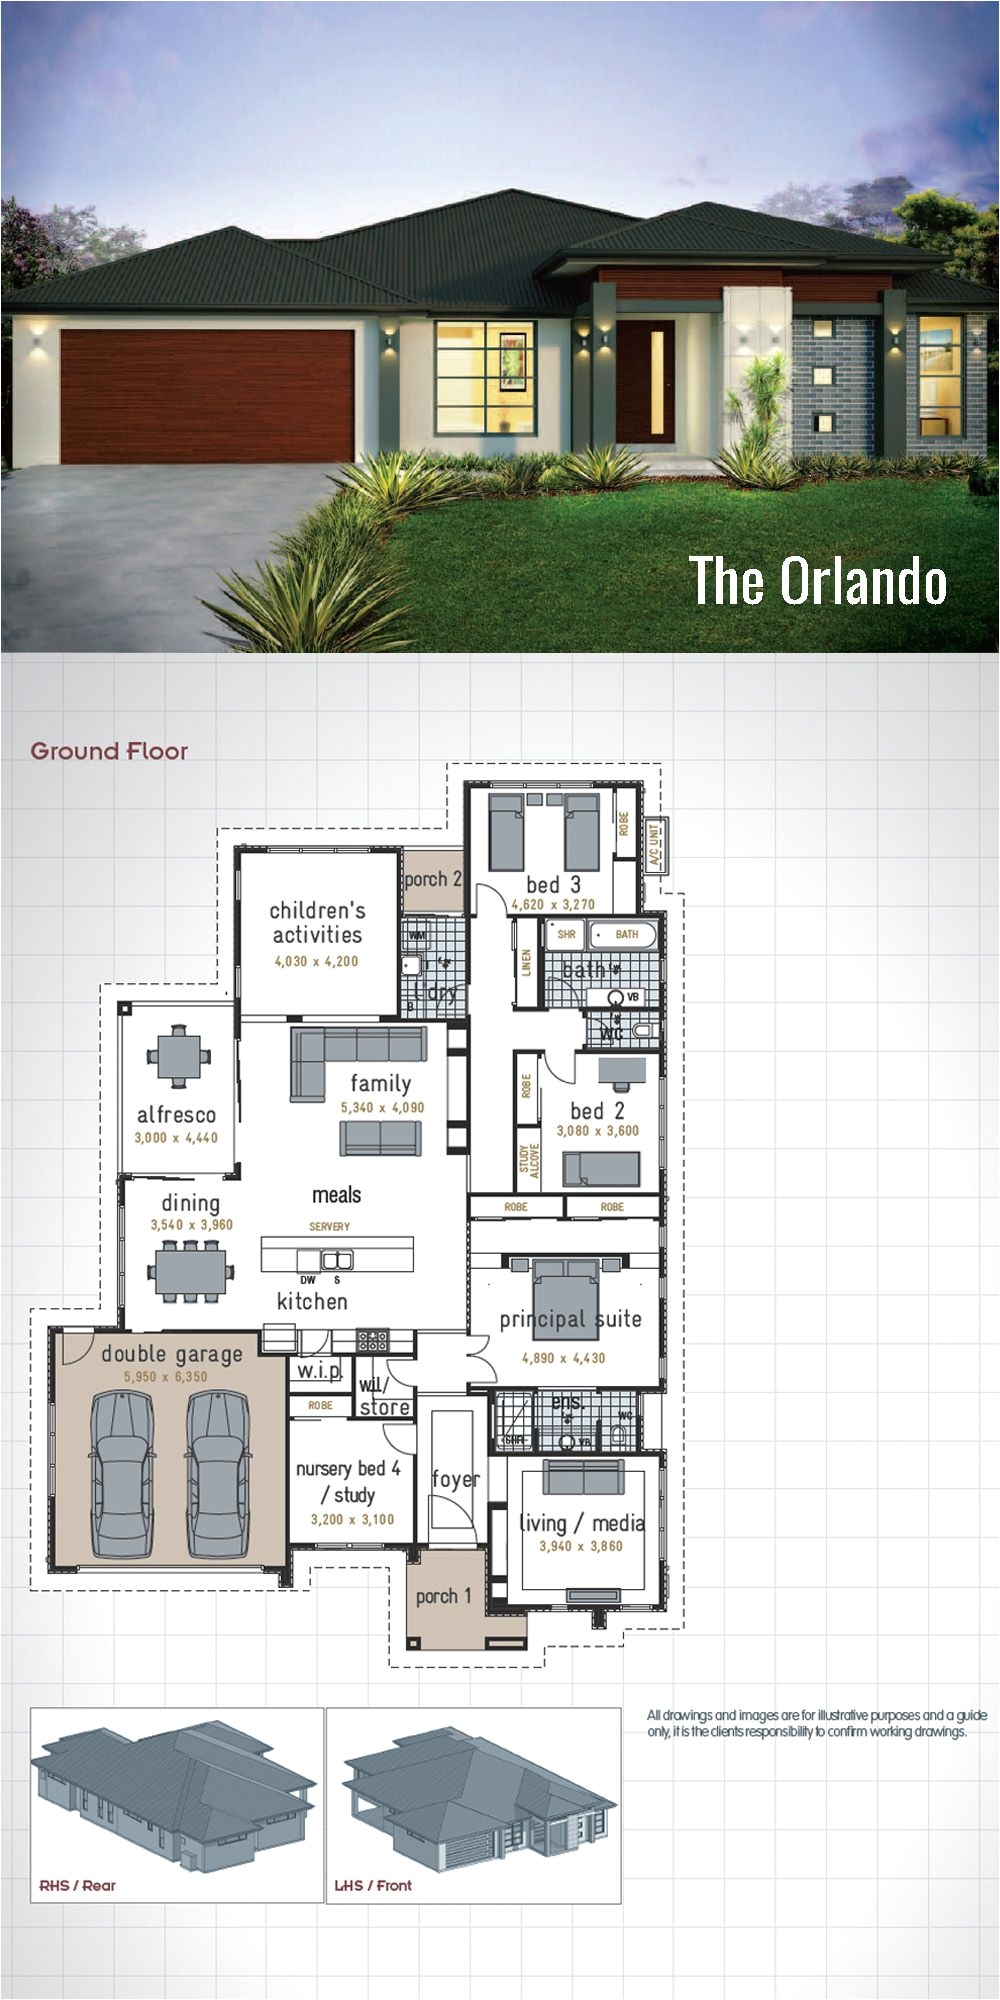 4 bedroom double wide floor plans single storey house design the orlando a generous size of 278 sq